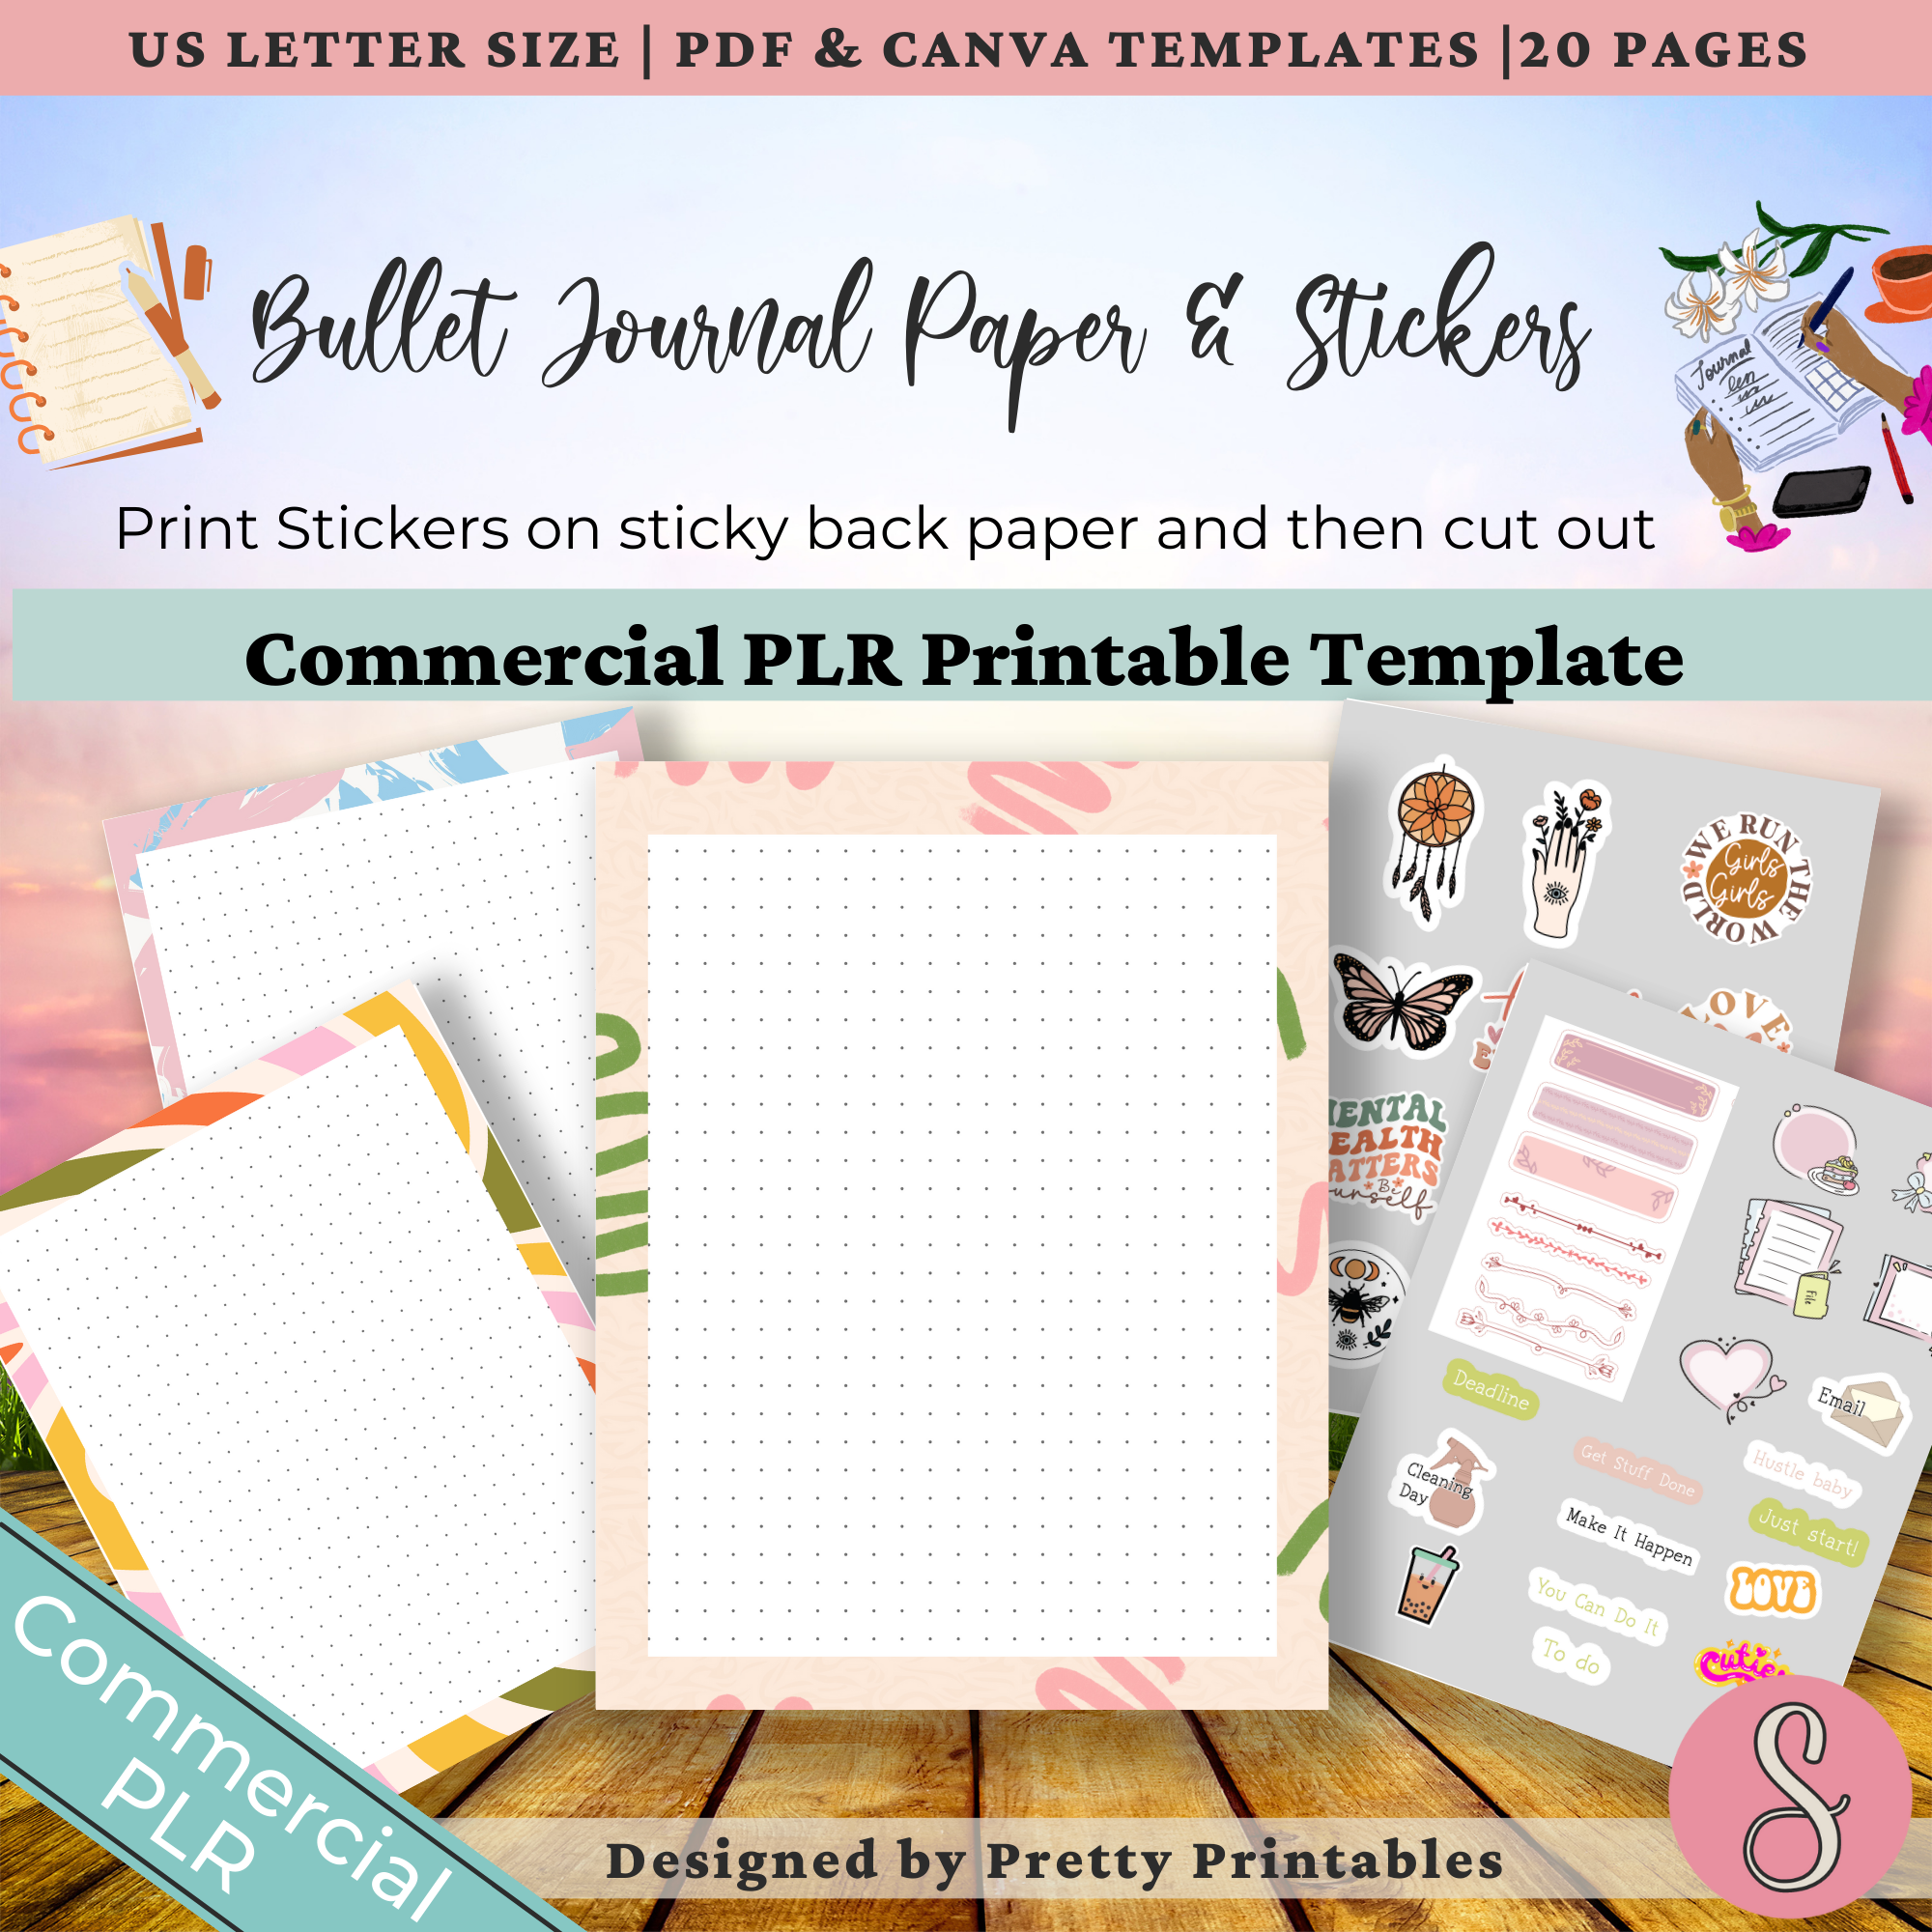 Bullet Journal add-ons - Framed Dot Paper and Stickers Set.